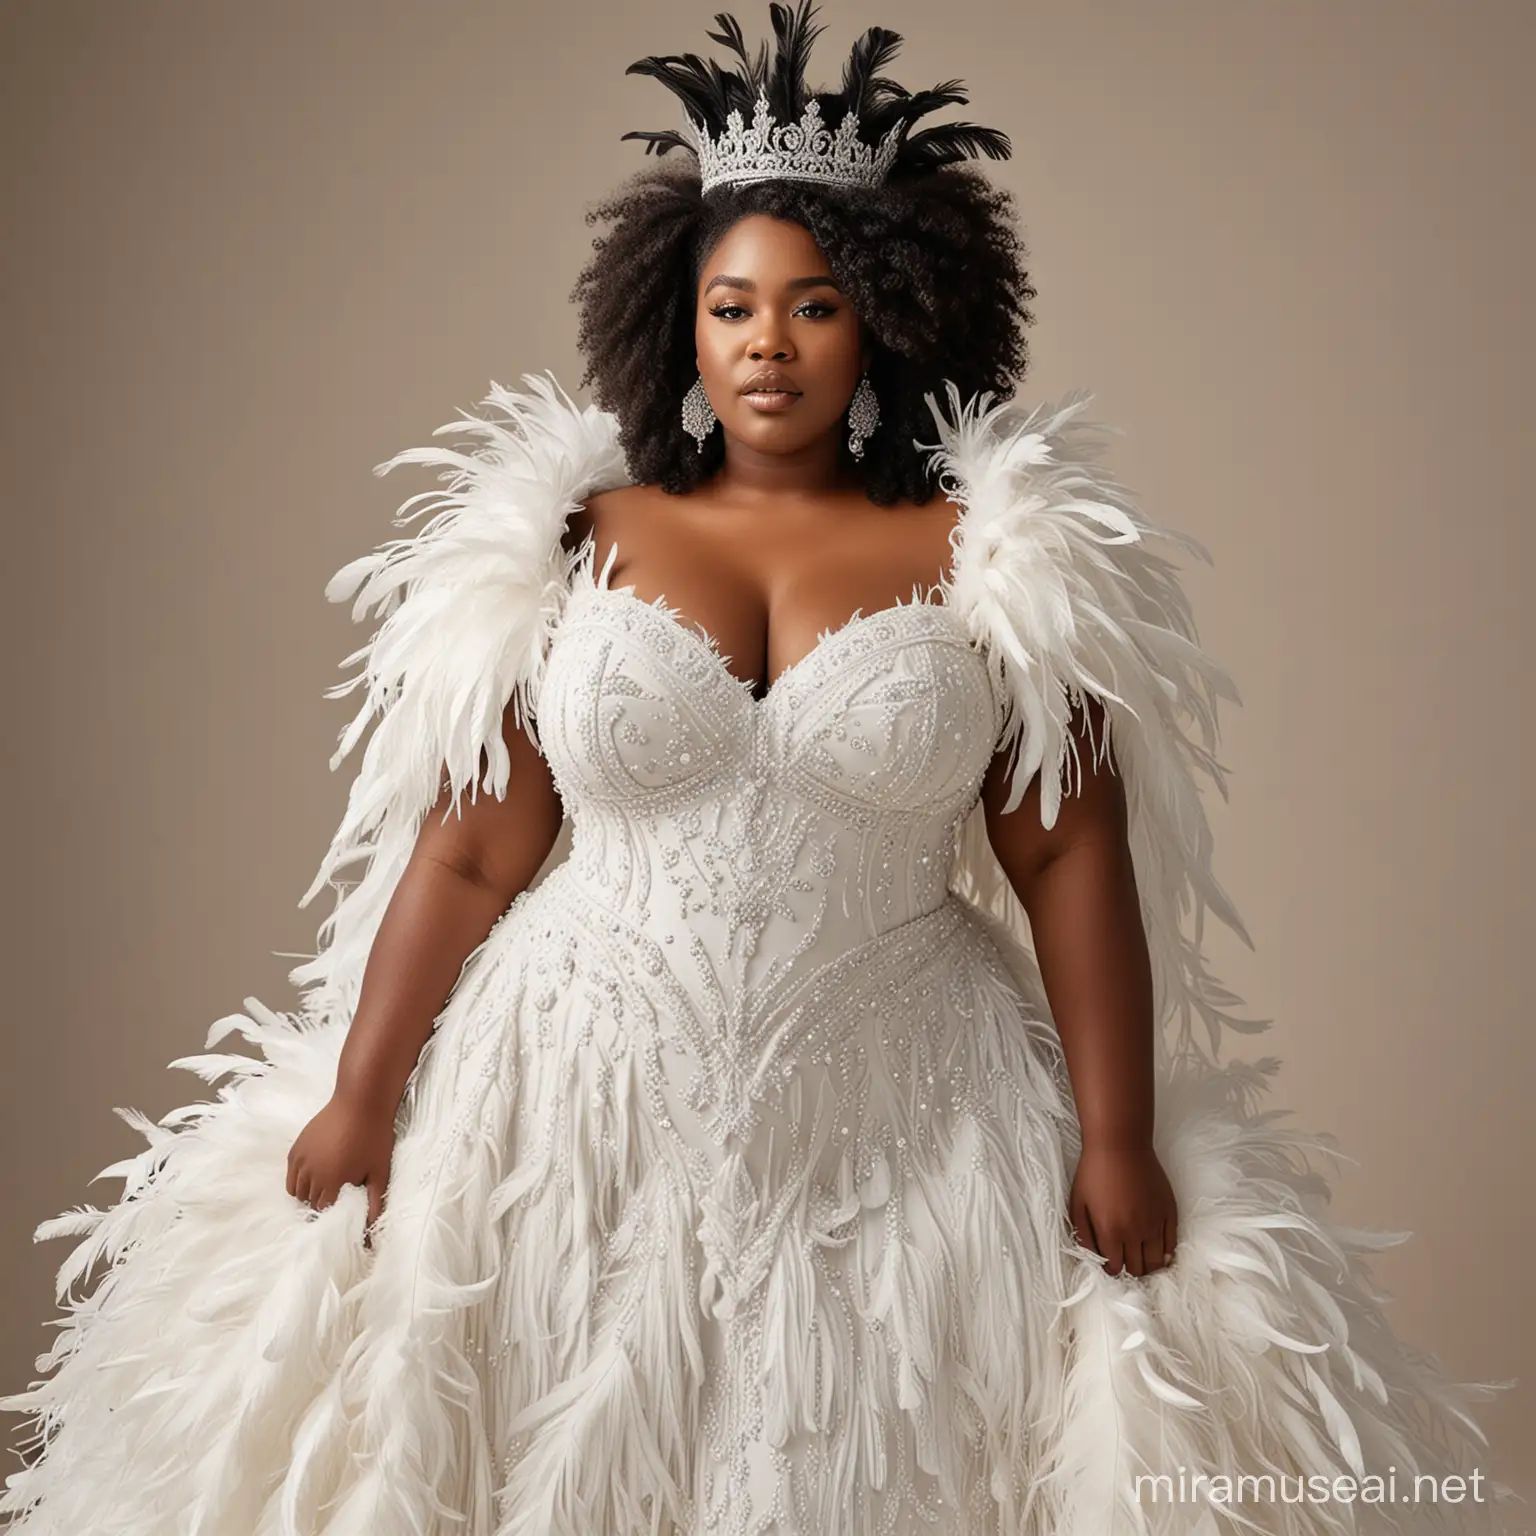 Elegant Plus Size Black Bride in Feathery Wedding Gown and Crown